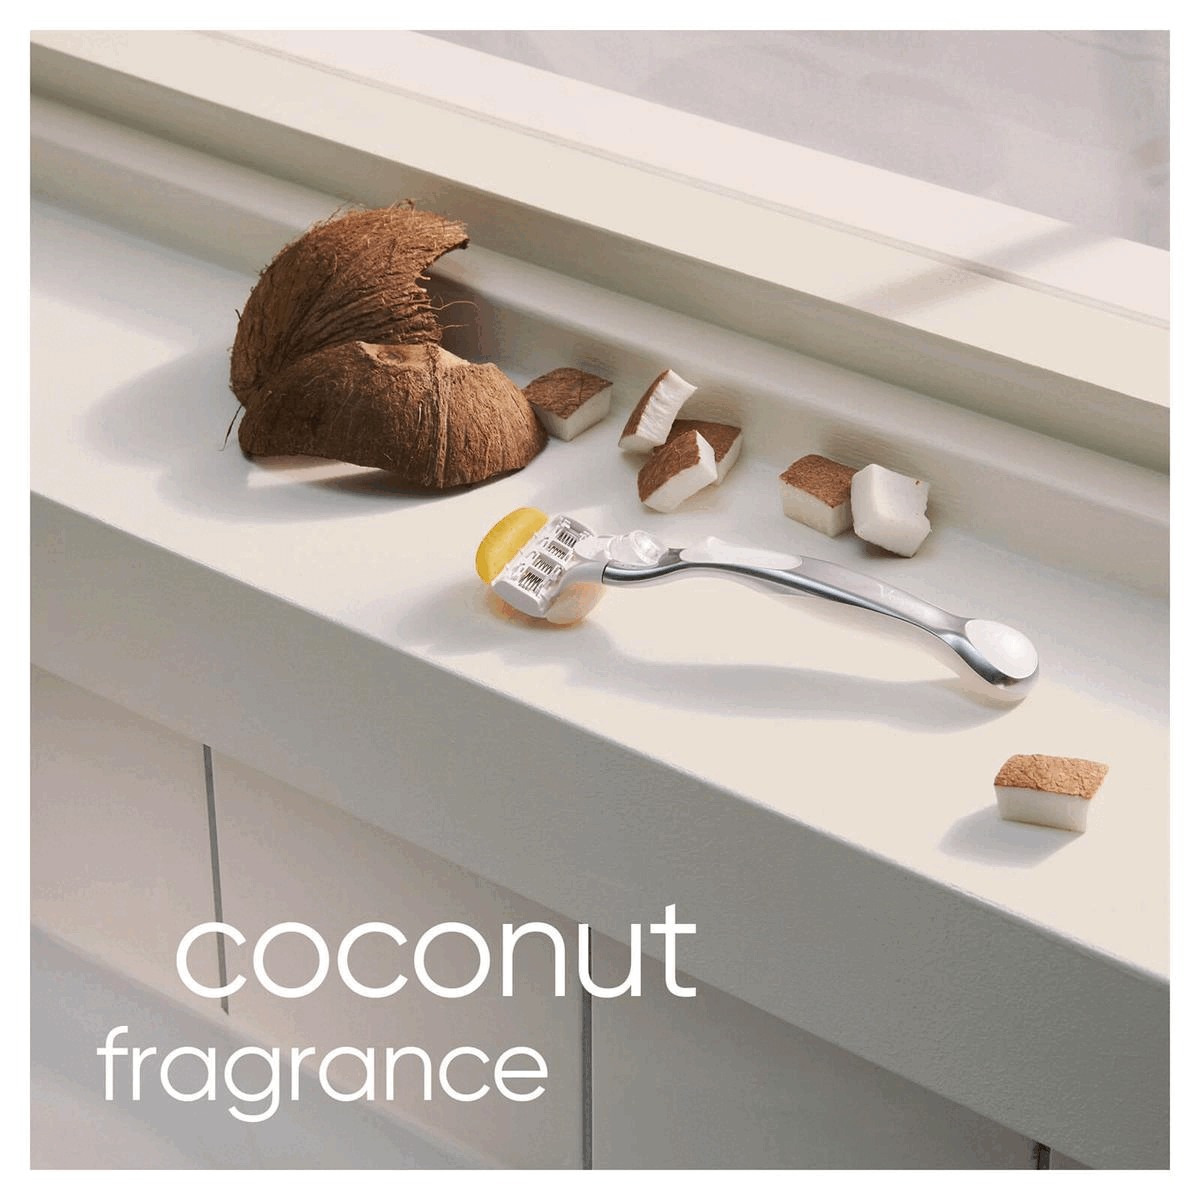 Image 1 Product near window with pieces of coconut, coconut fragranceImage 2 Product on sink with other blades, fits any Venus handle Image 3 Product on white surface, metal handle: built to last
                          Image 4 Partnered with: TERRACYCLE worldwide razor recycling